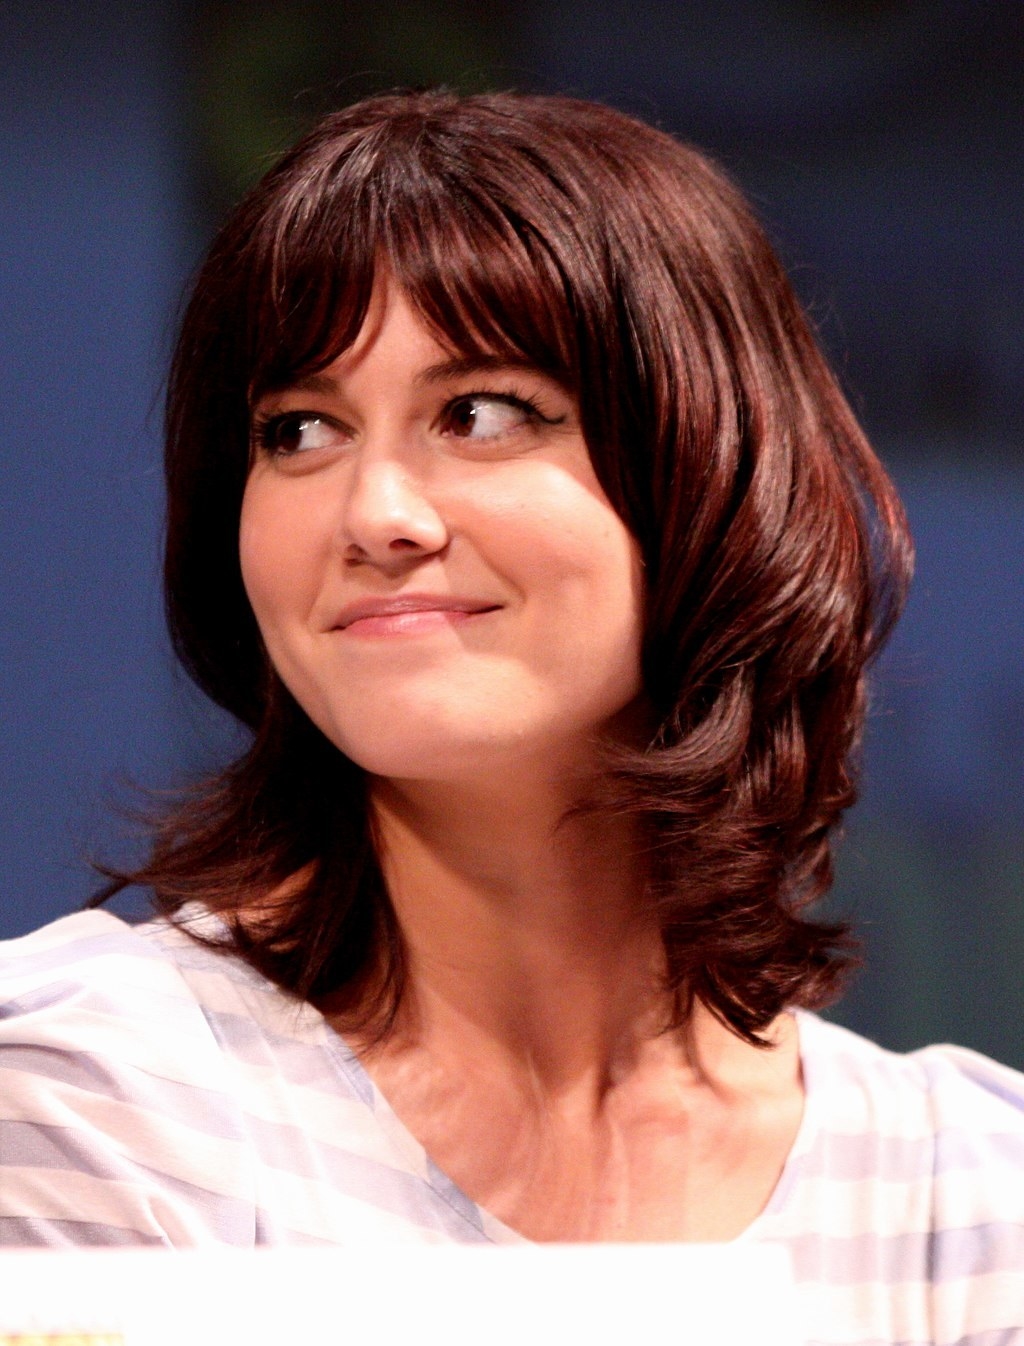 Mary Elizabeth Winstead at the 2010 Comic Con in San Diego